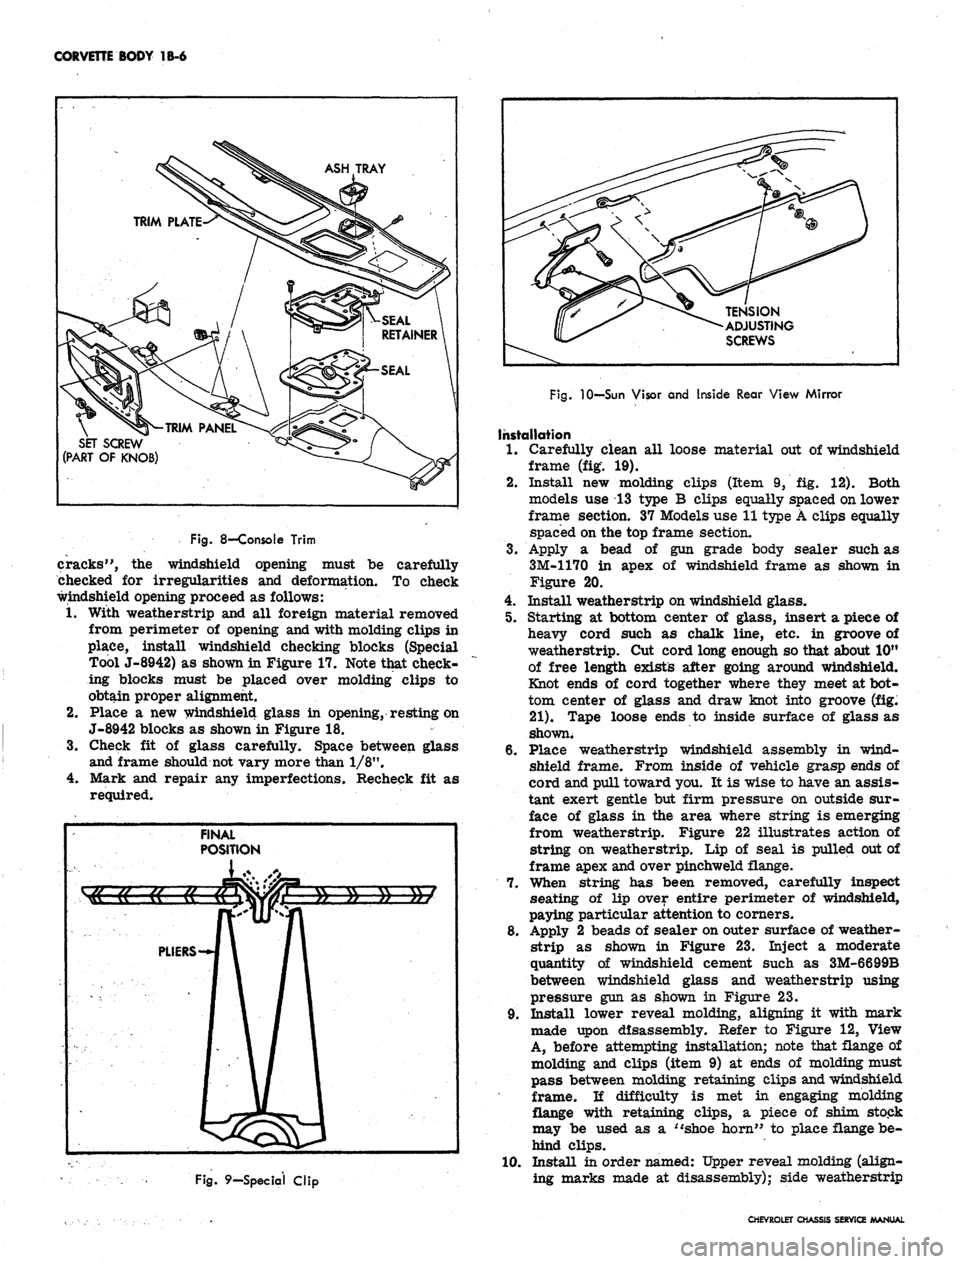 CHEVROLET CAMARO 1967 1.G Chassis Workshop Manual 
CORVETTE BODY
 1B-6

ASH TRAY

SET SCREW

(PART
 OF
 KNOB) 
TENSION

ADJUSTING

SCREWS

Fig.
 8—Console Trim

cracks",
 the
 windshield opening must
 be
 carefully

checked
 for
 irregularities
 an